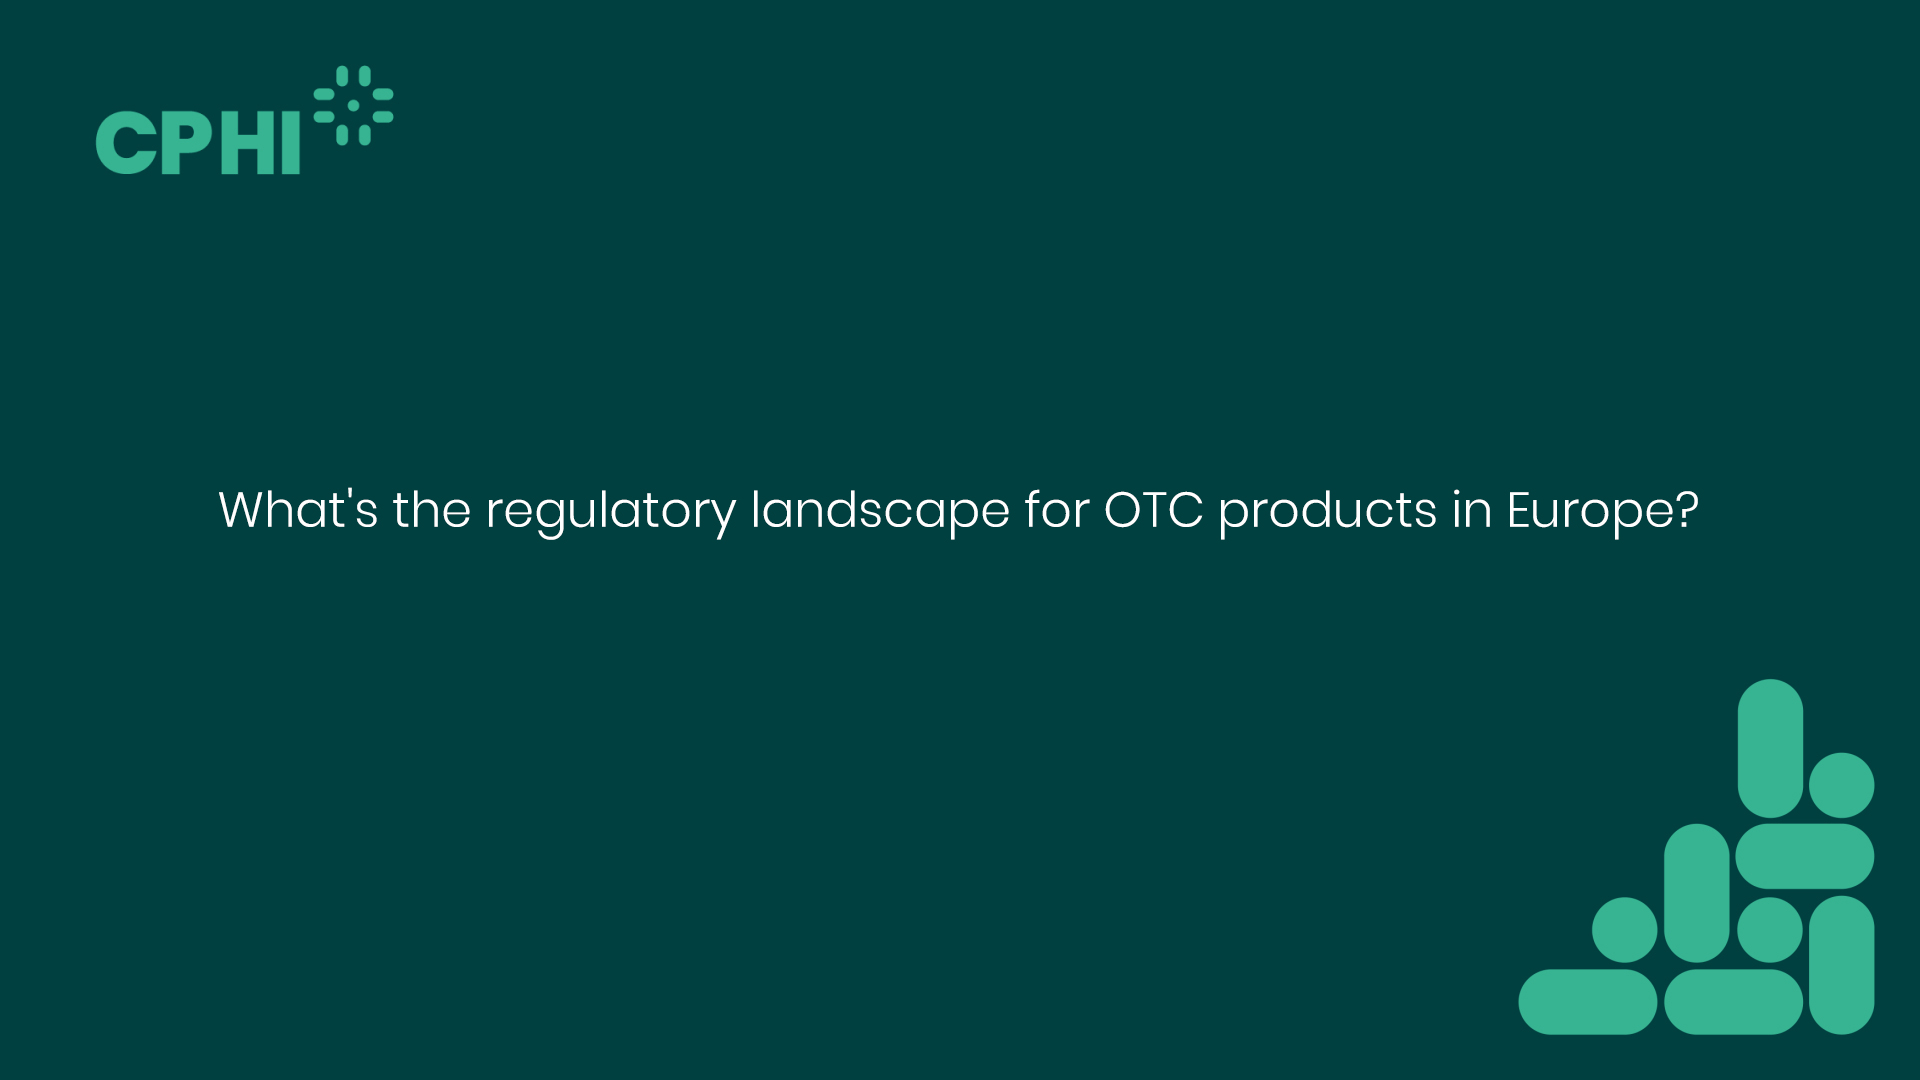 What's the regulatory landscape for OTC products in Europe?